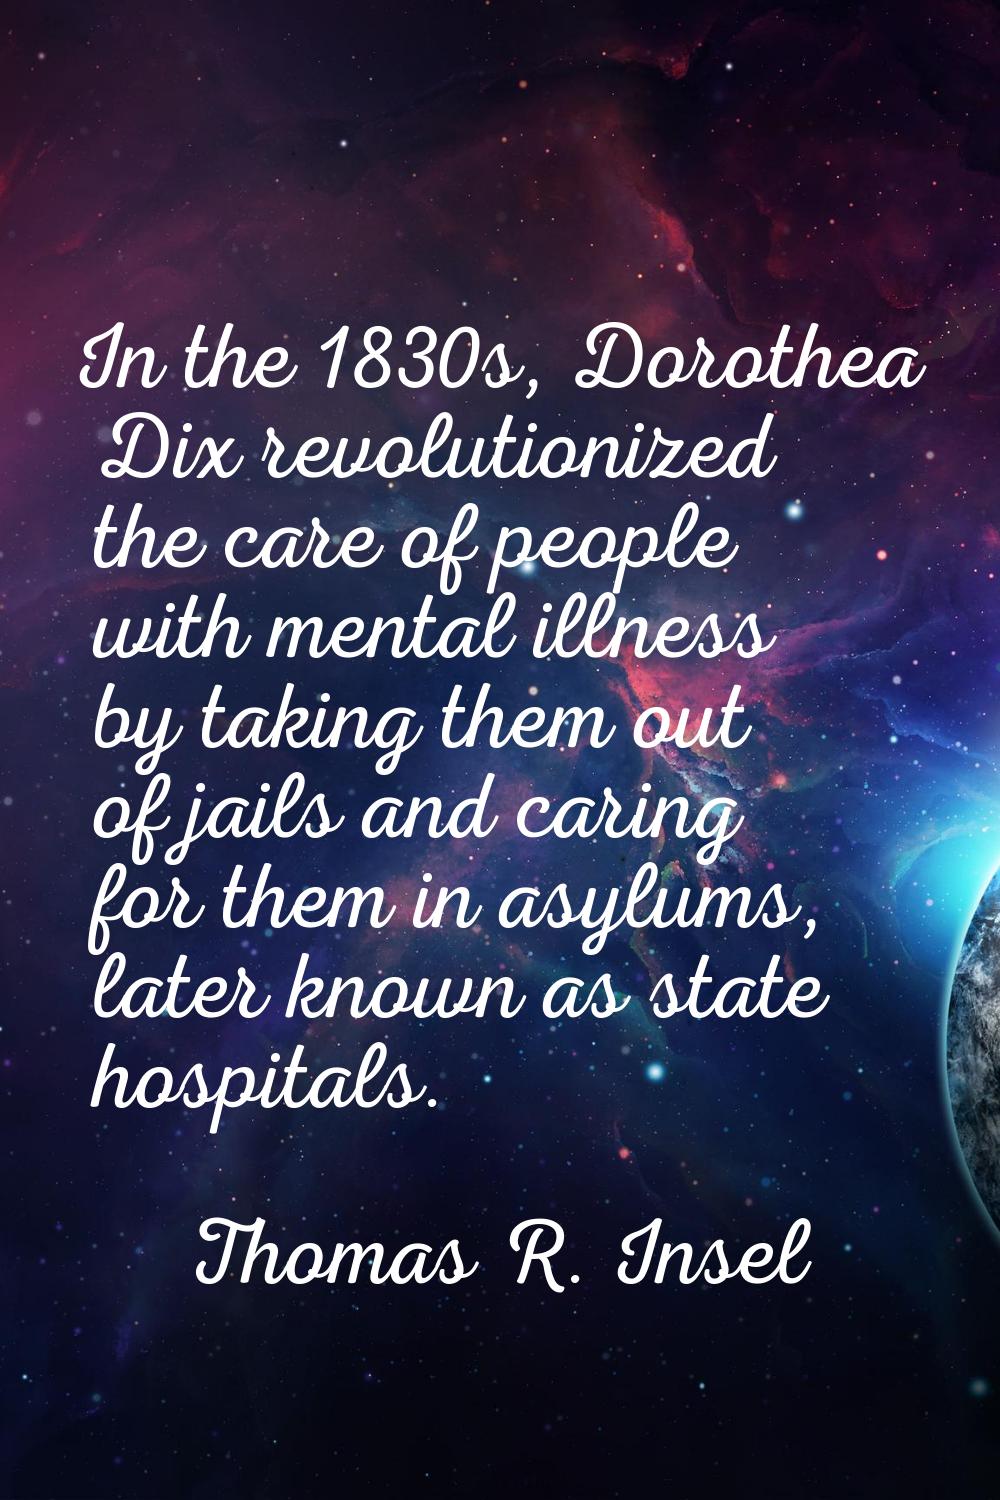 In the 1830s, Dorothea Dix revolutionized the care of people with mental illness by taking them out